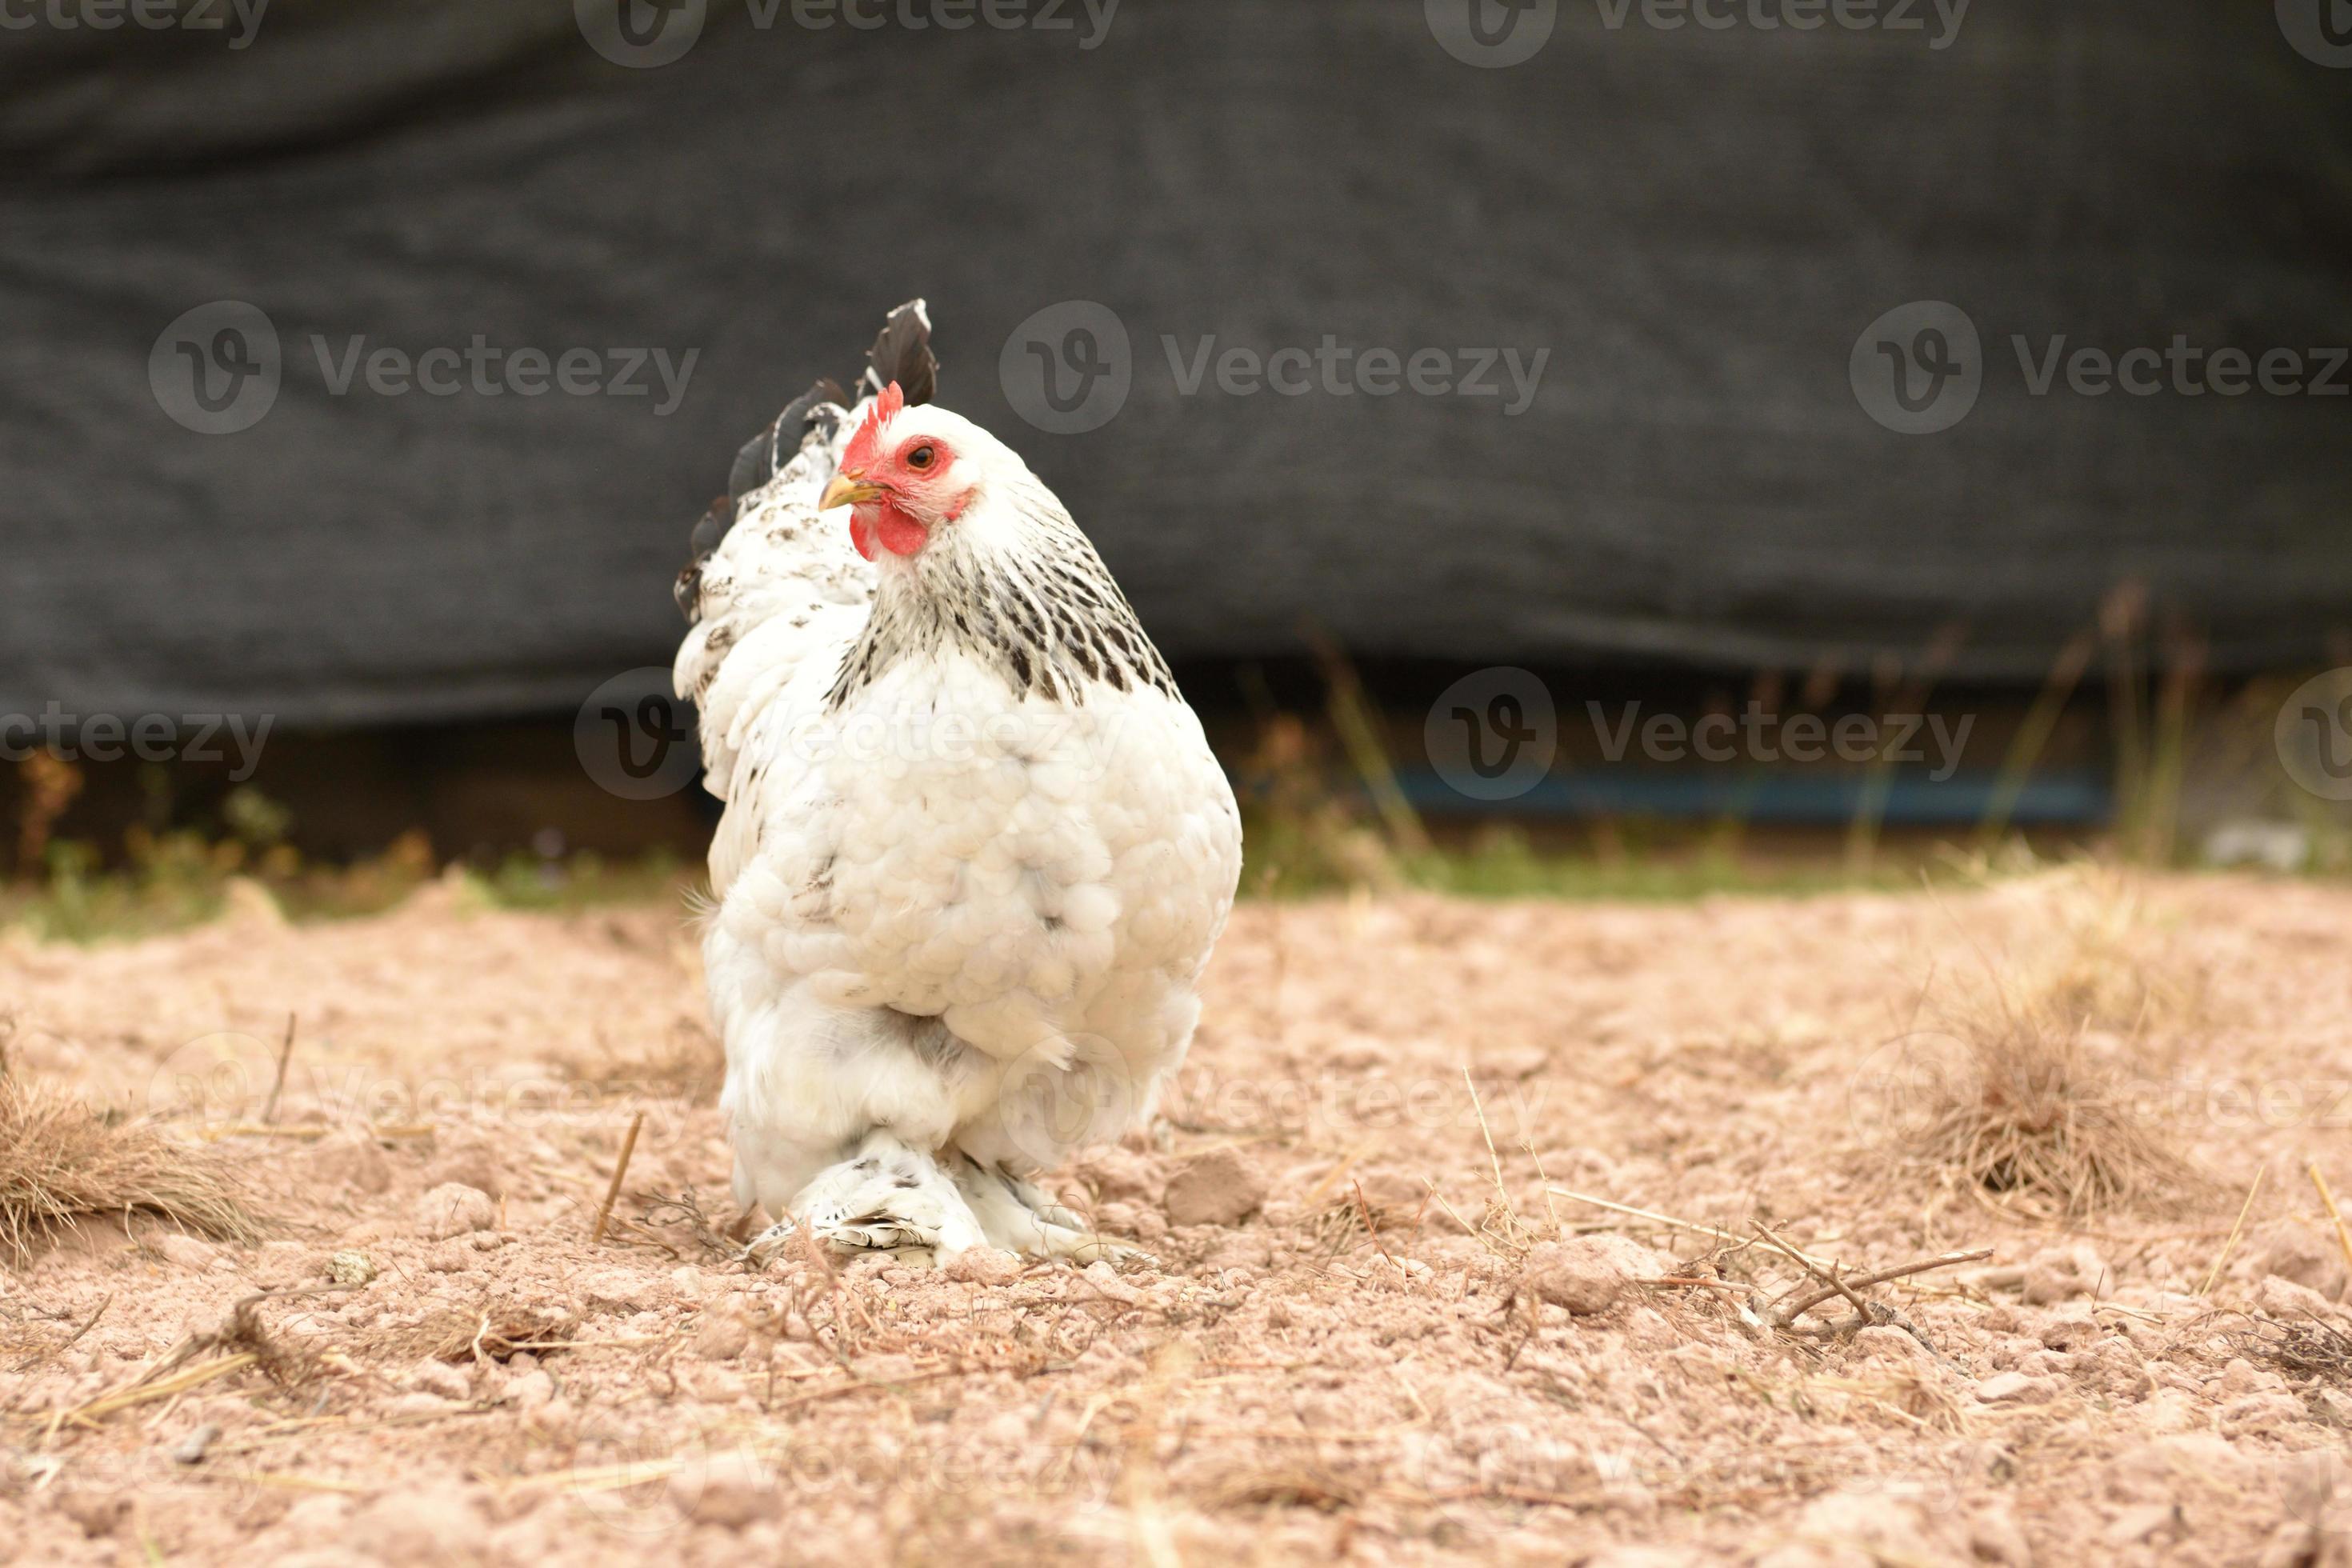 https://static.vecteezy.com/system/resources/previews/008/947/014/large_2x/giant-chicken-brahma-standing-on-ground-in-farm-area-photo.jpg